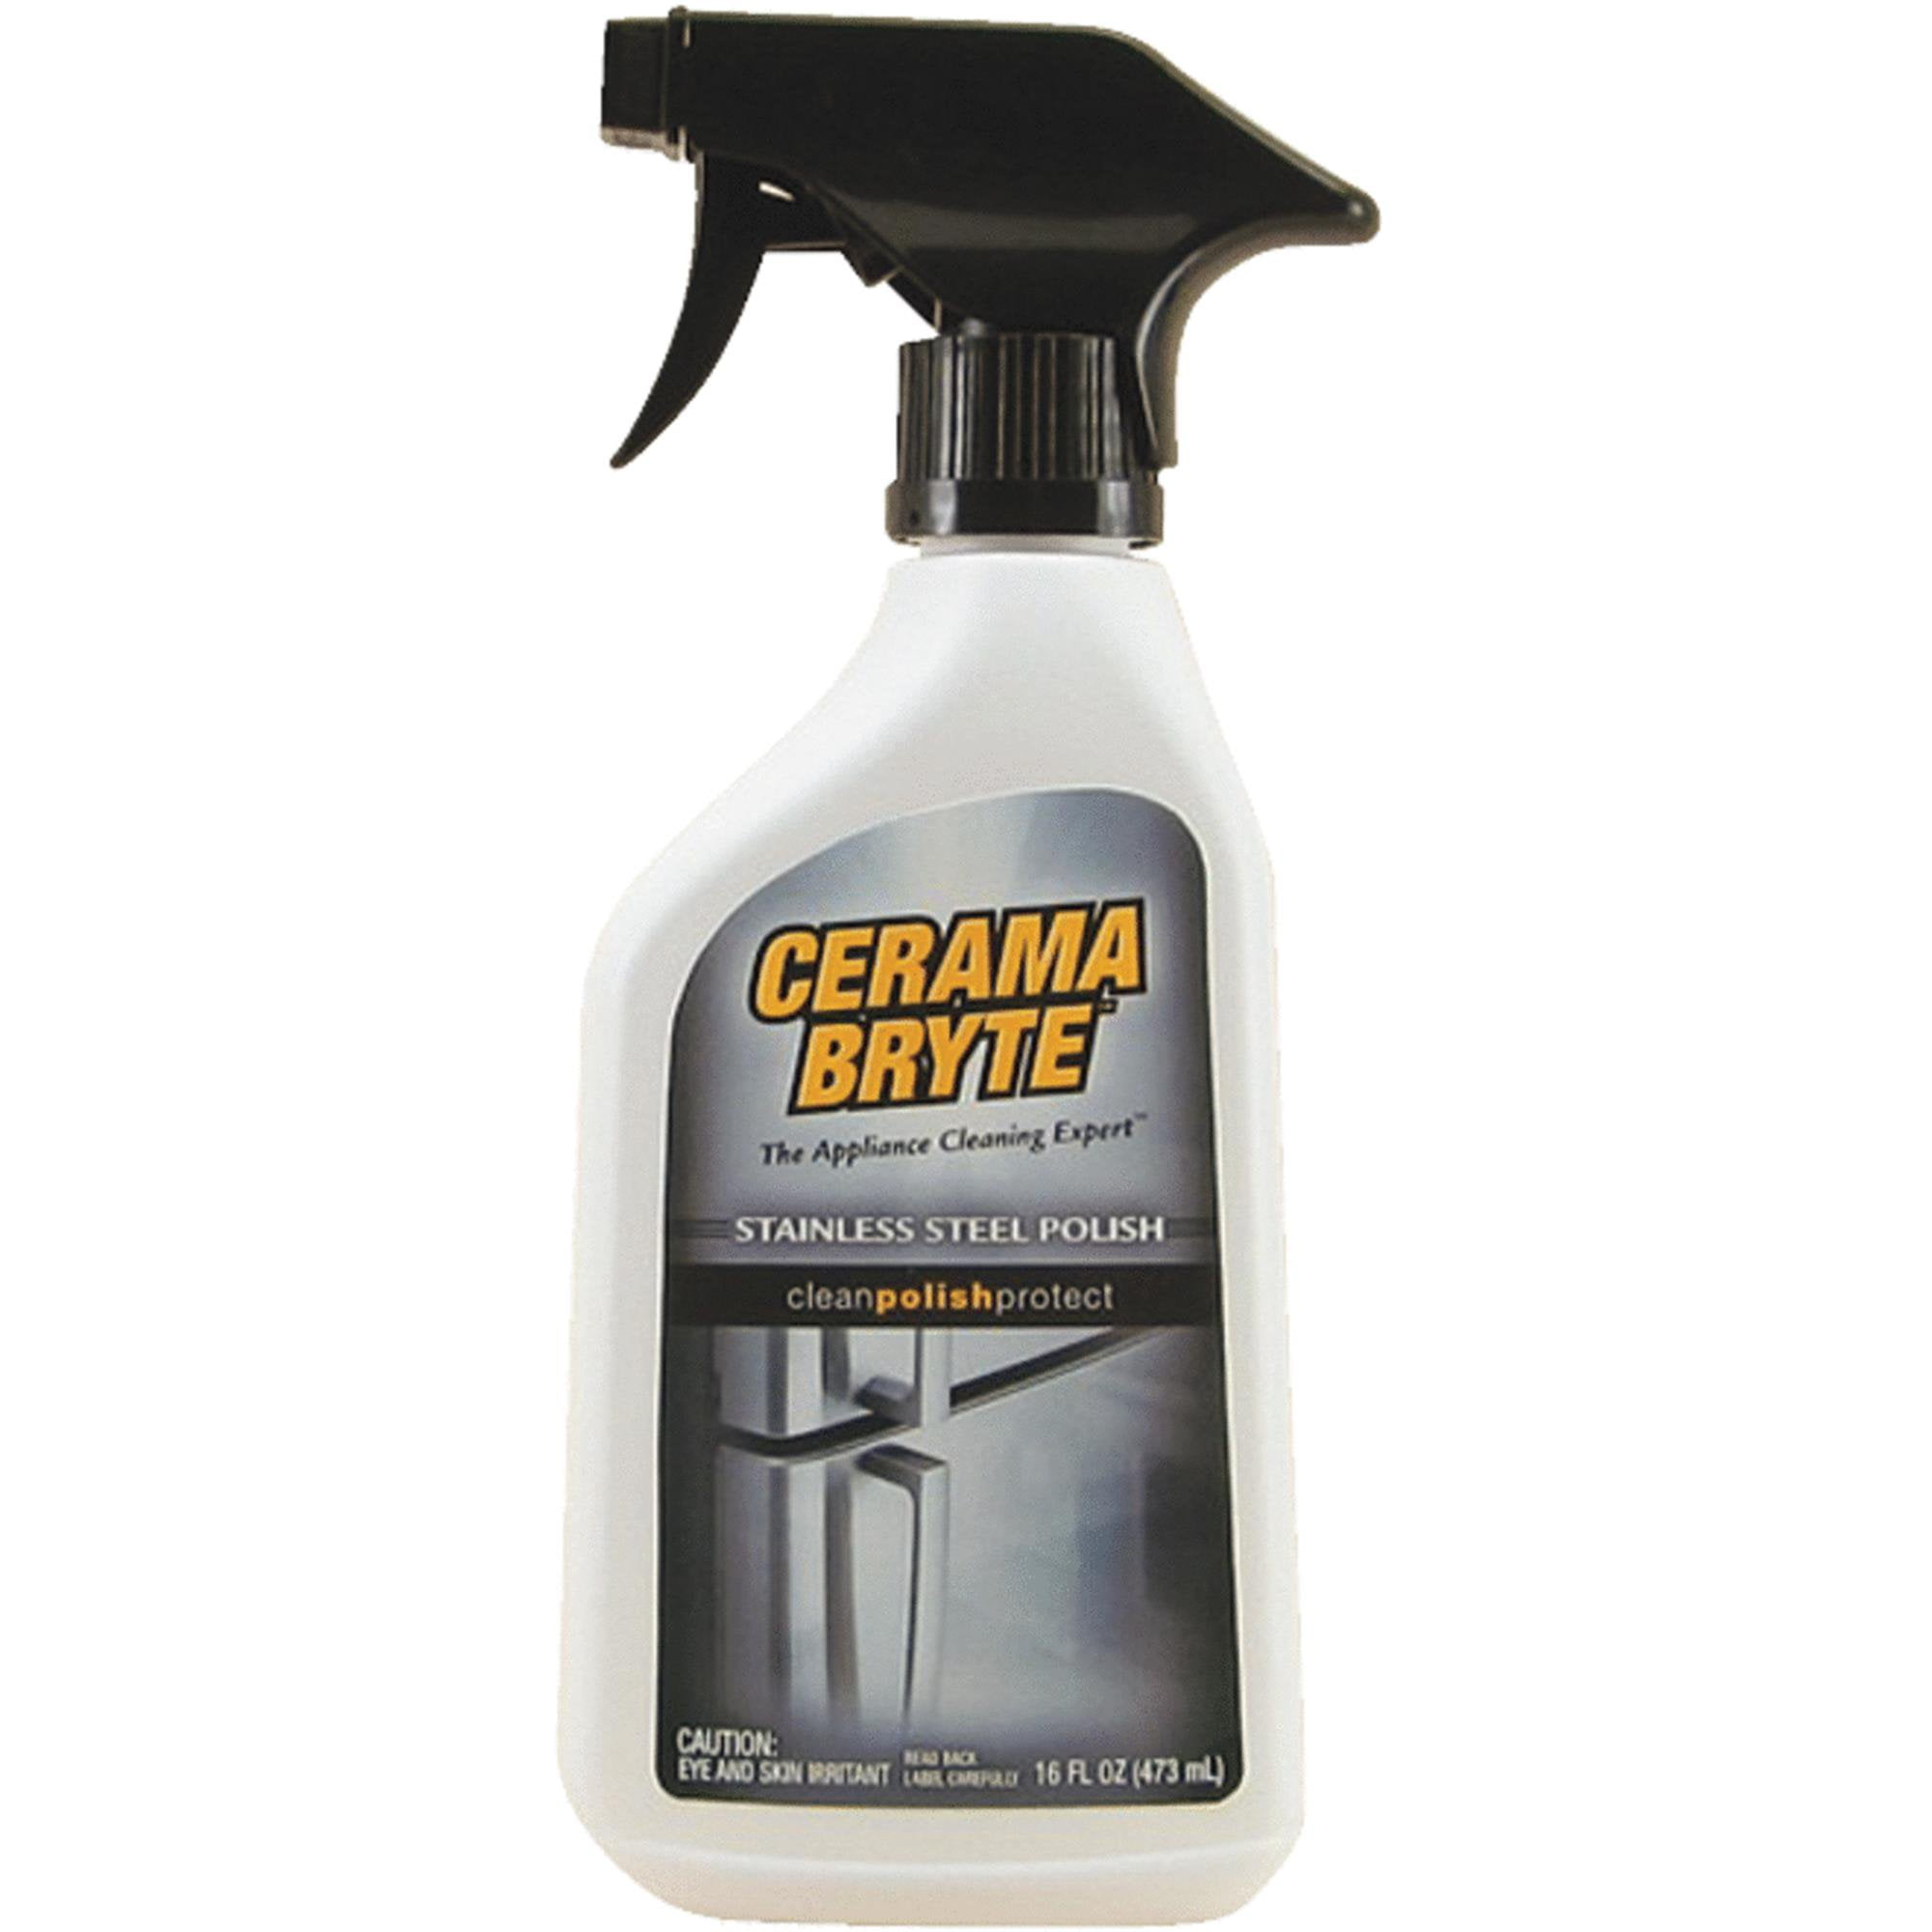 Cerma Bryte Stainless Steel Cleaner Polish - Walmart.com - Walmart.com Cerama Bryte Stainless Steel Appliance Cleaner